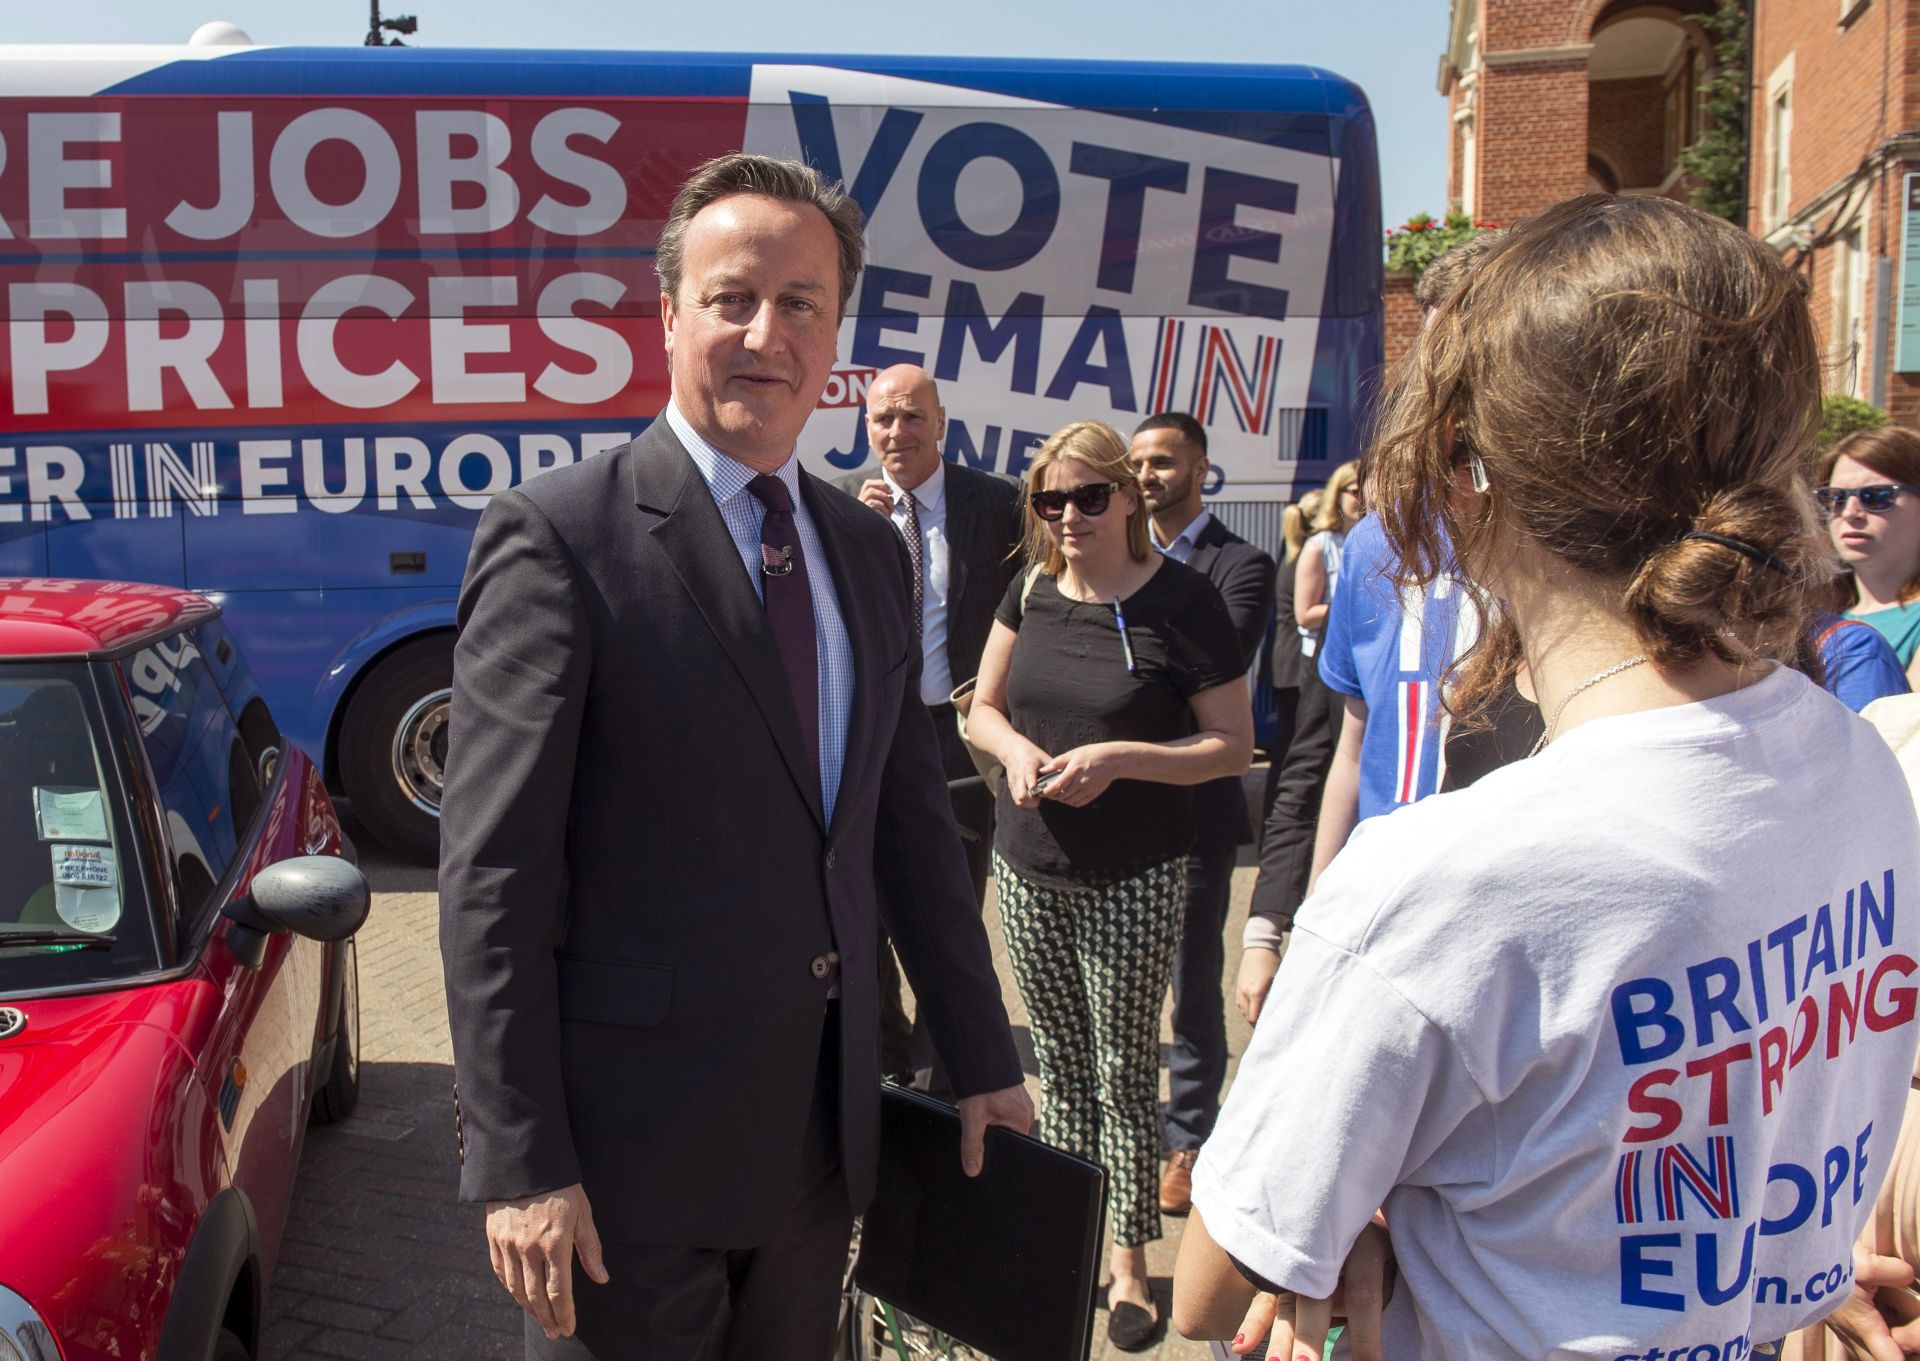 epa05348456 British Prime Minister David Cameron during a Remain In event in Central London, Britain, 06 June 2016. Mr Cameron was joined by members of rival political parties to campaign for Britons to vote to remain in the EU in the referendum set for 23 June 2016.  EPA/WILL OLIVER/POOL INTERNATIONAL POOL